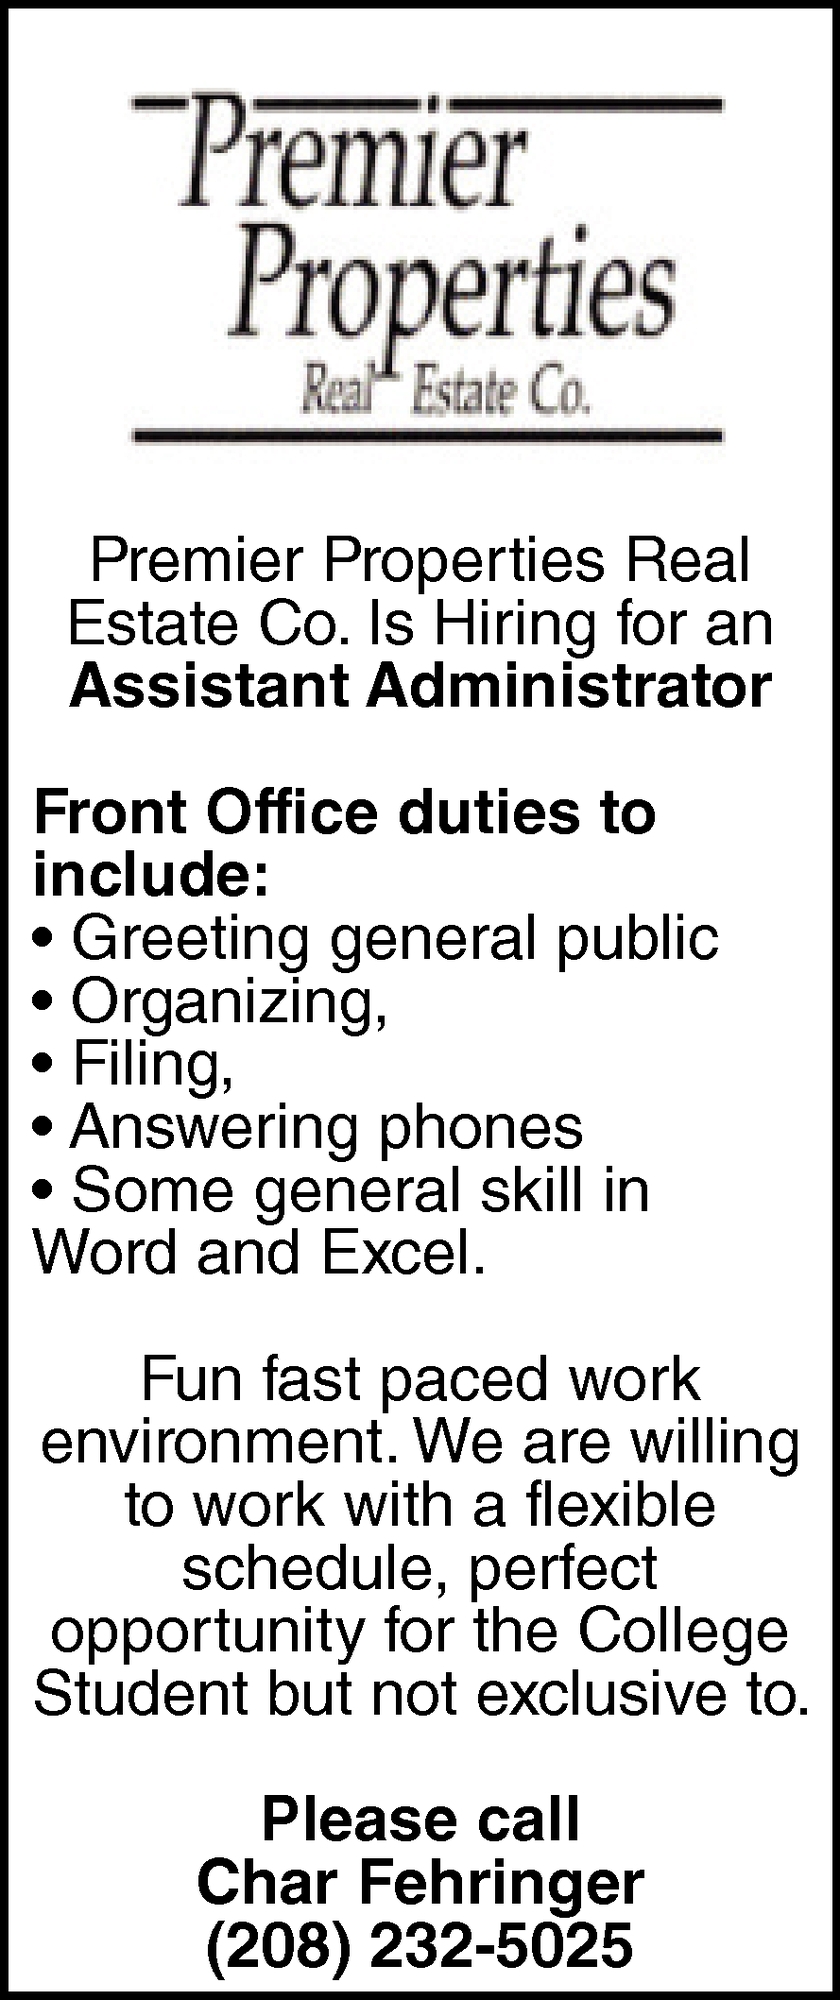 Assistant Administrator